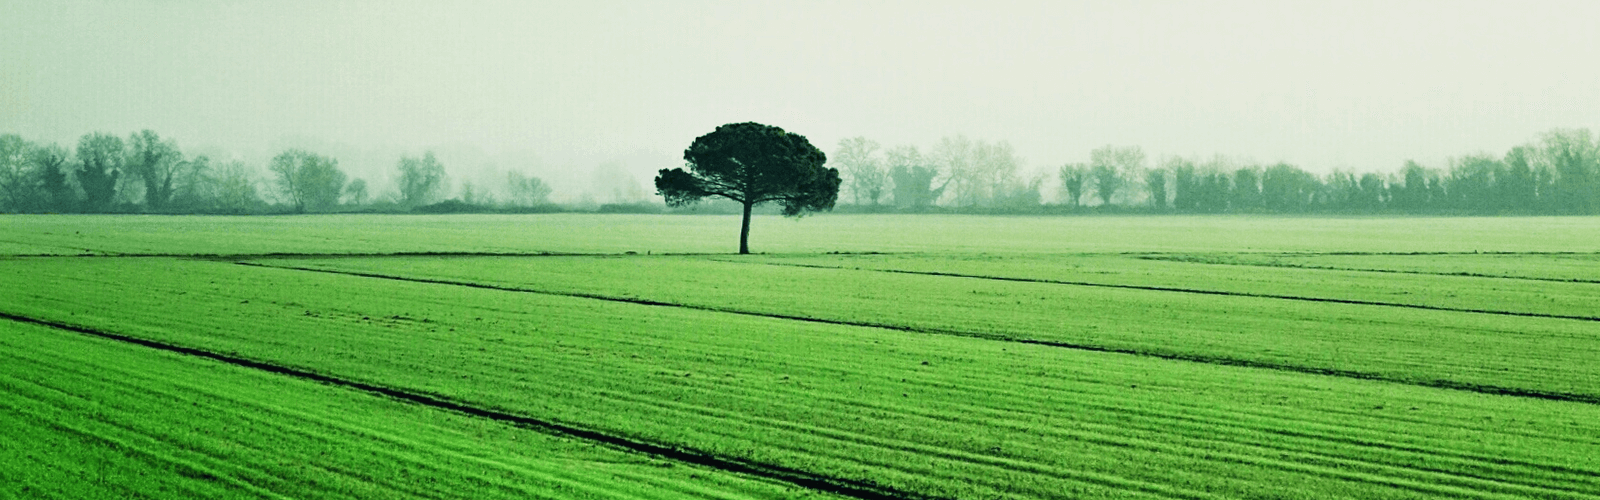 A lone tree in the middle of lush green farm.